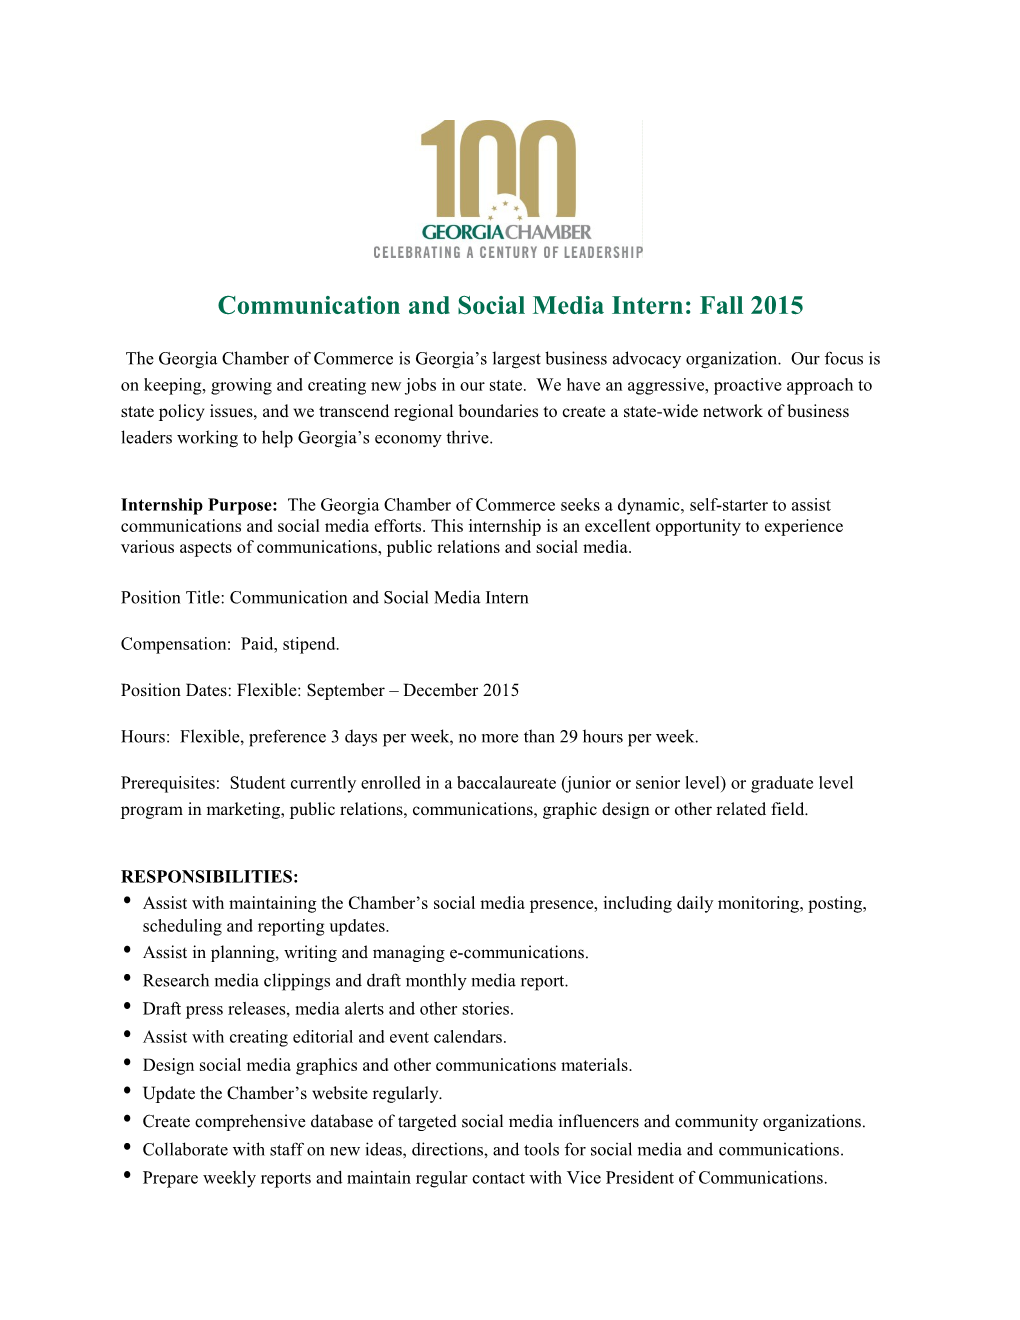 Position Title: Communication and Social Media Intern